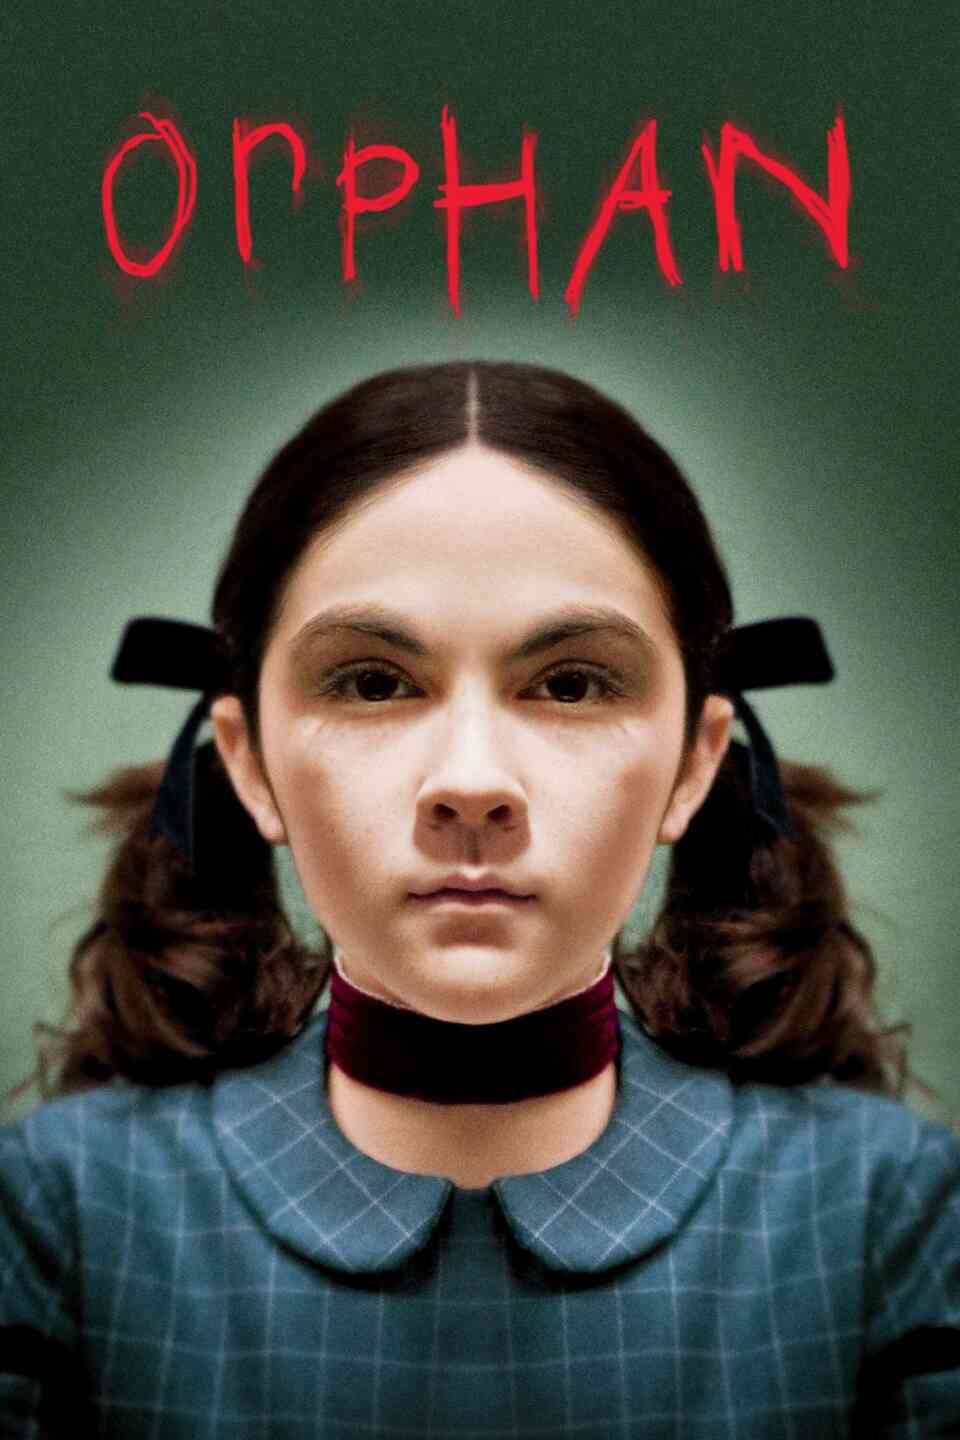 Read Orphan screenplay (poster)